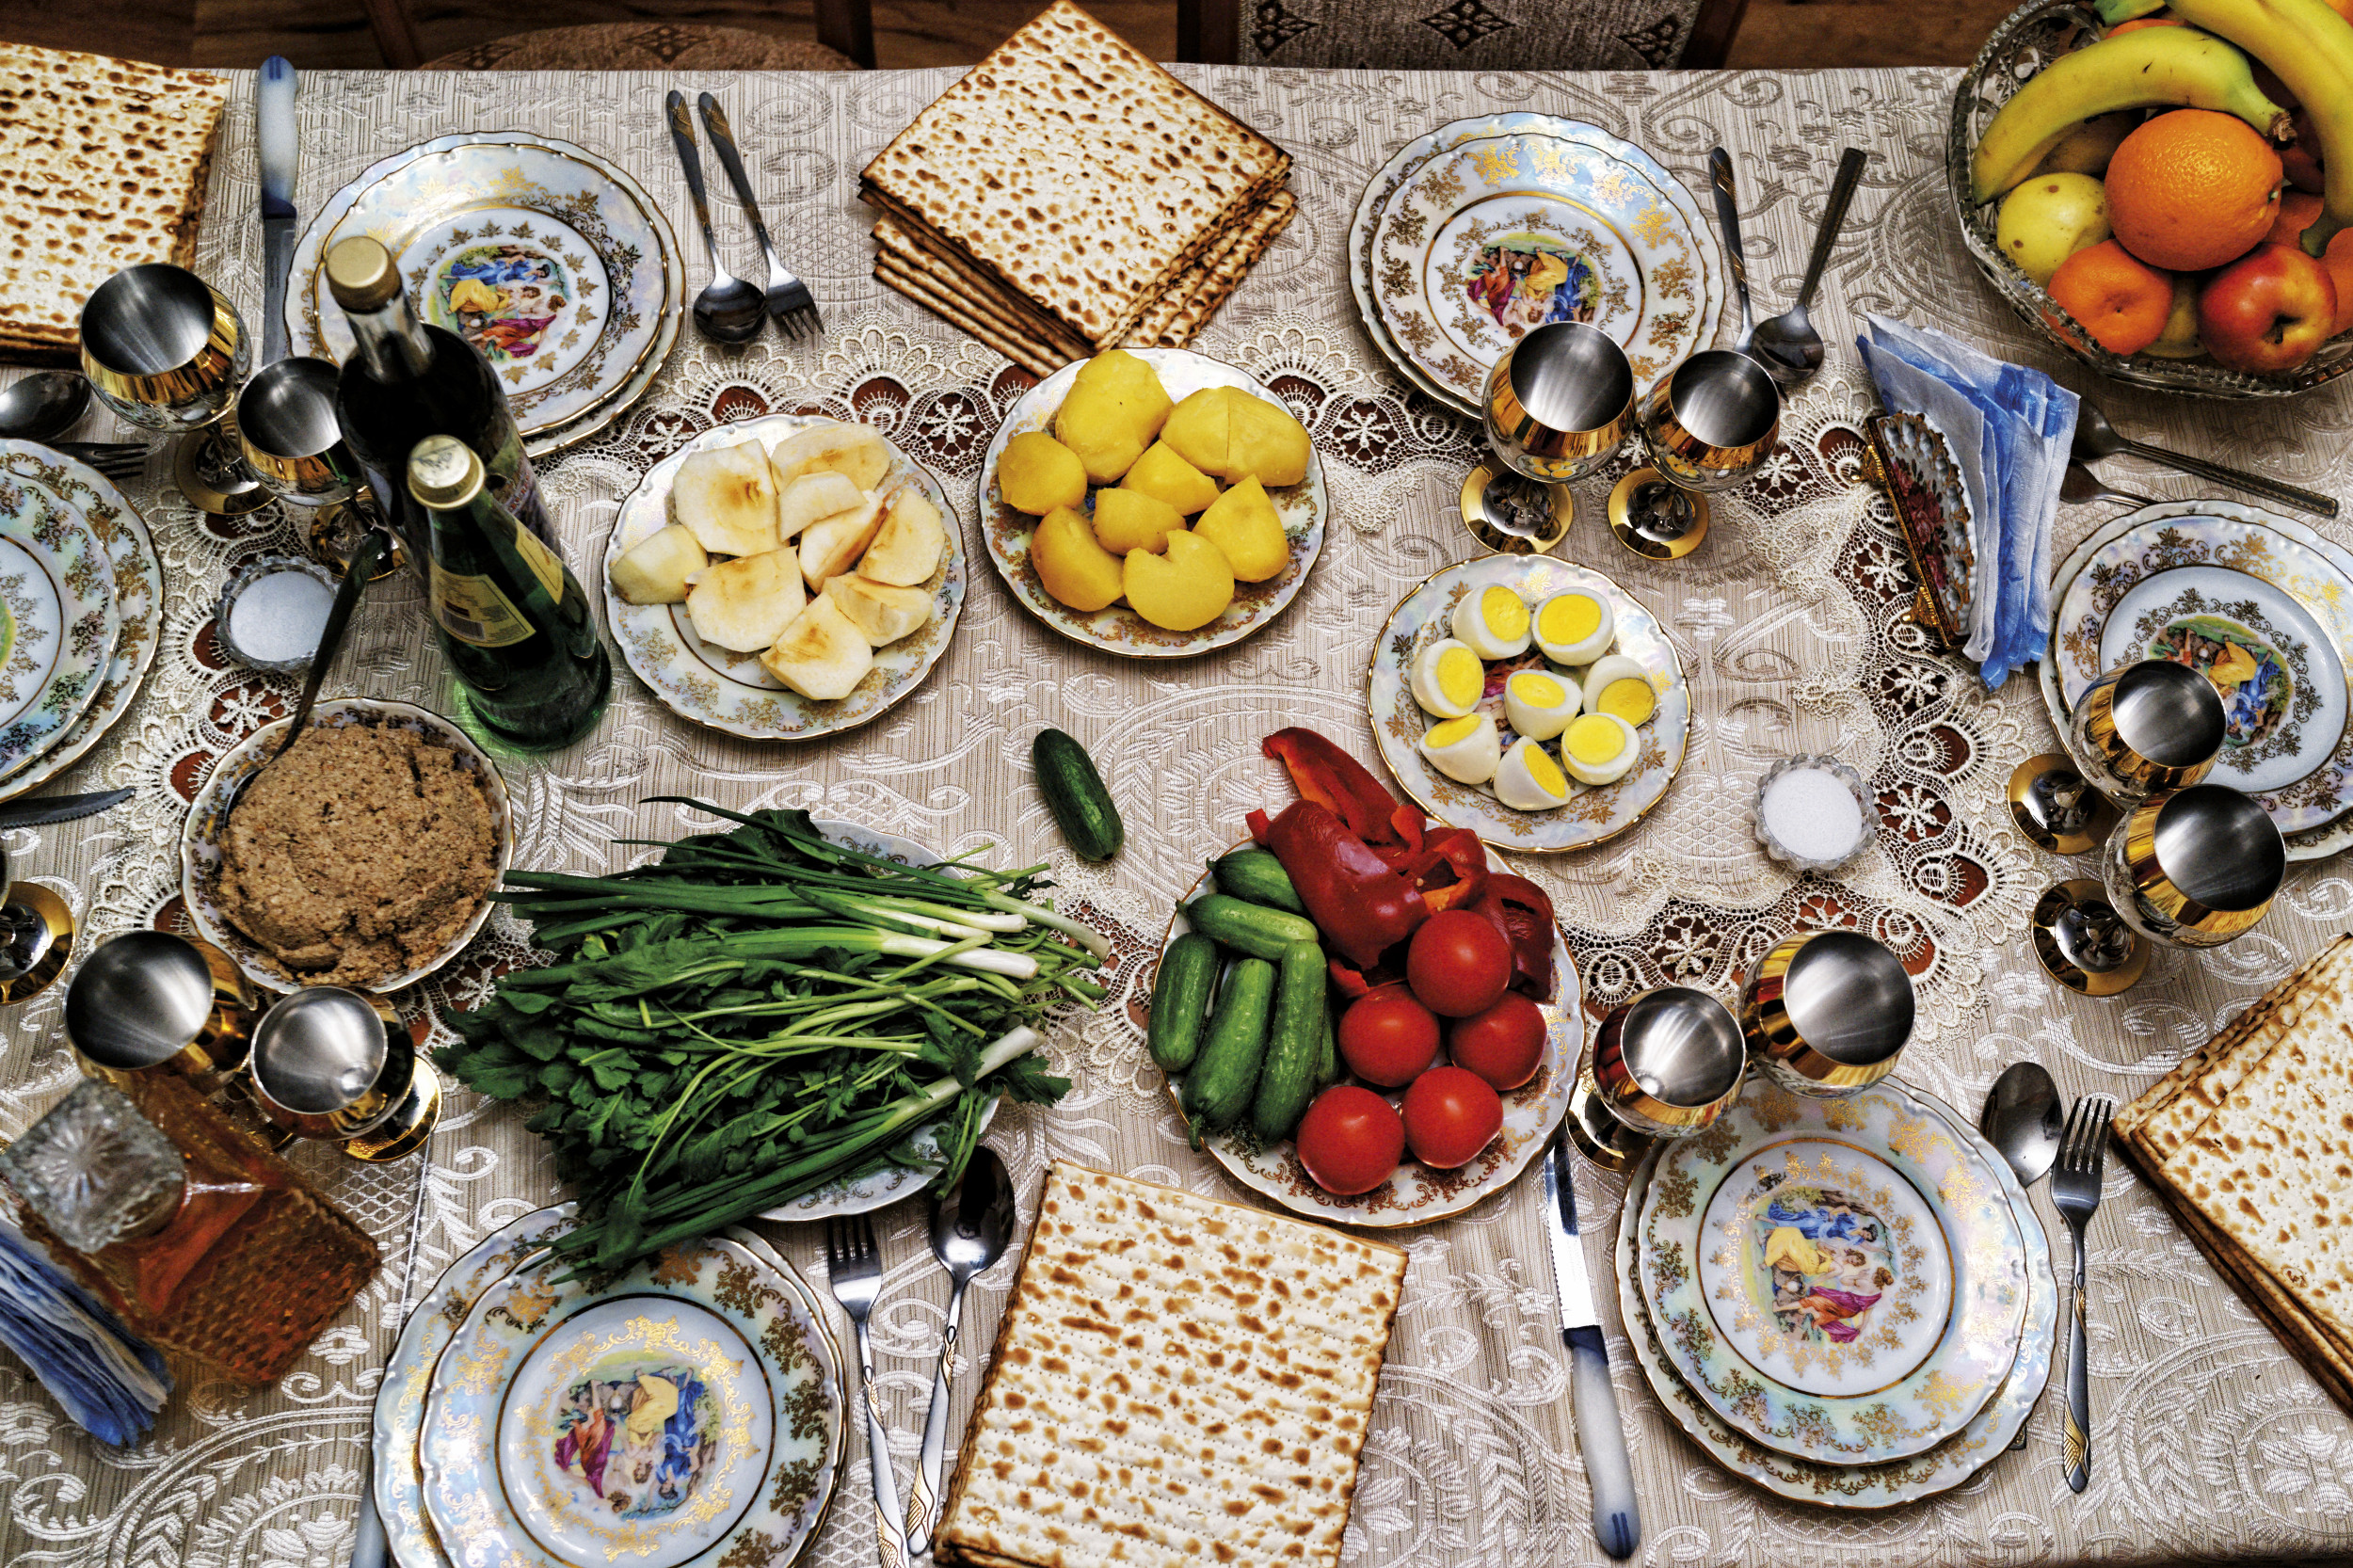 Happy Passover Latest News, Photos and Videos